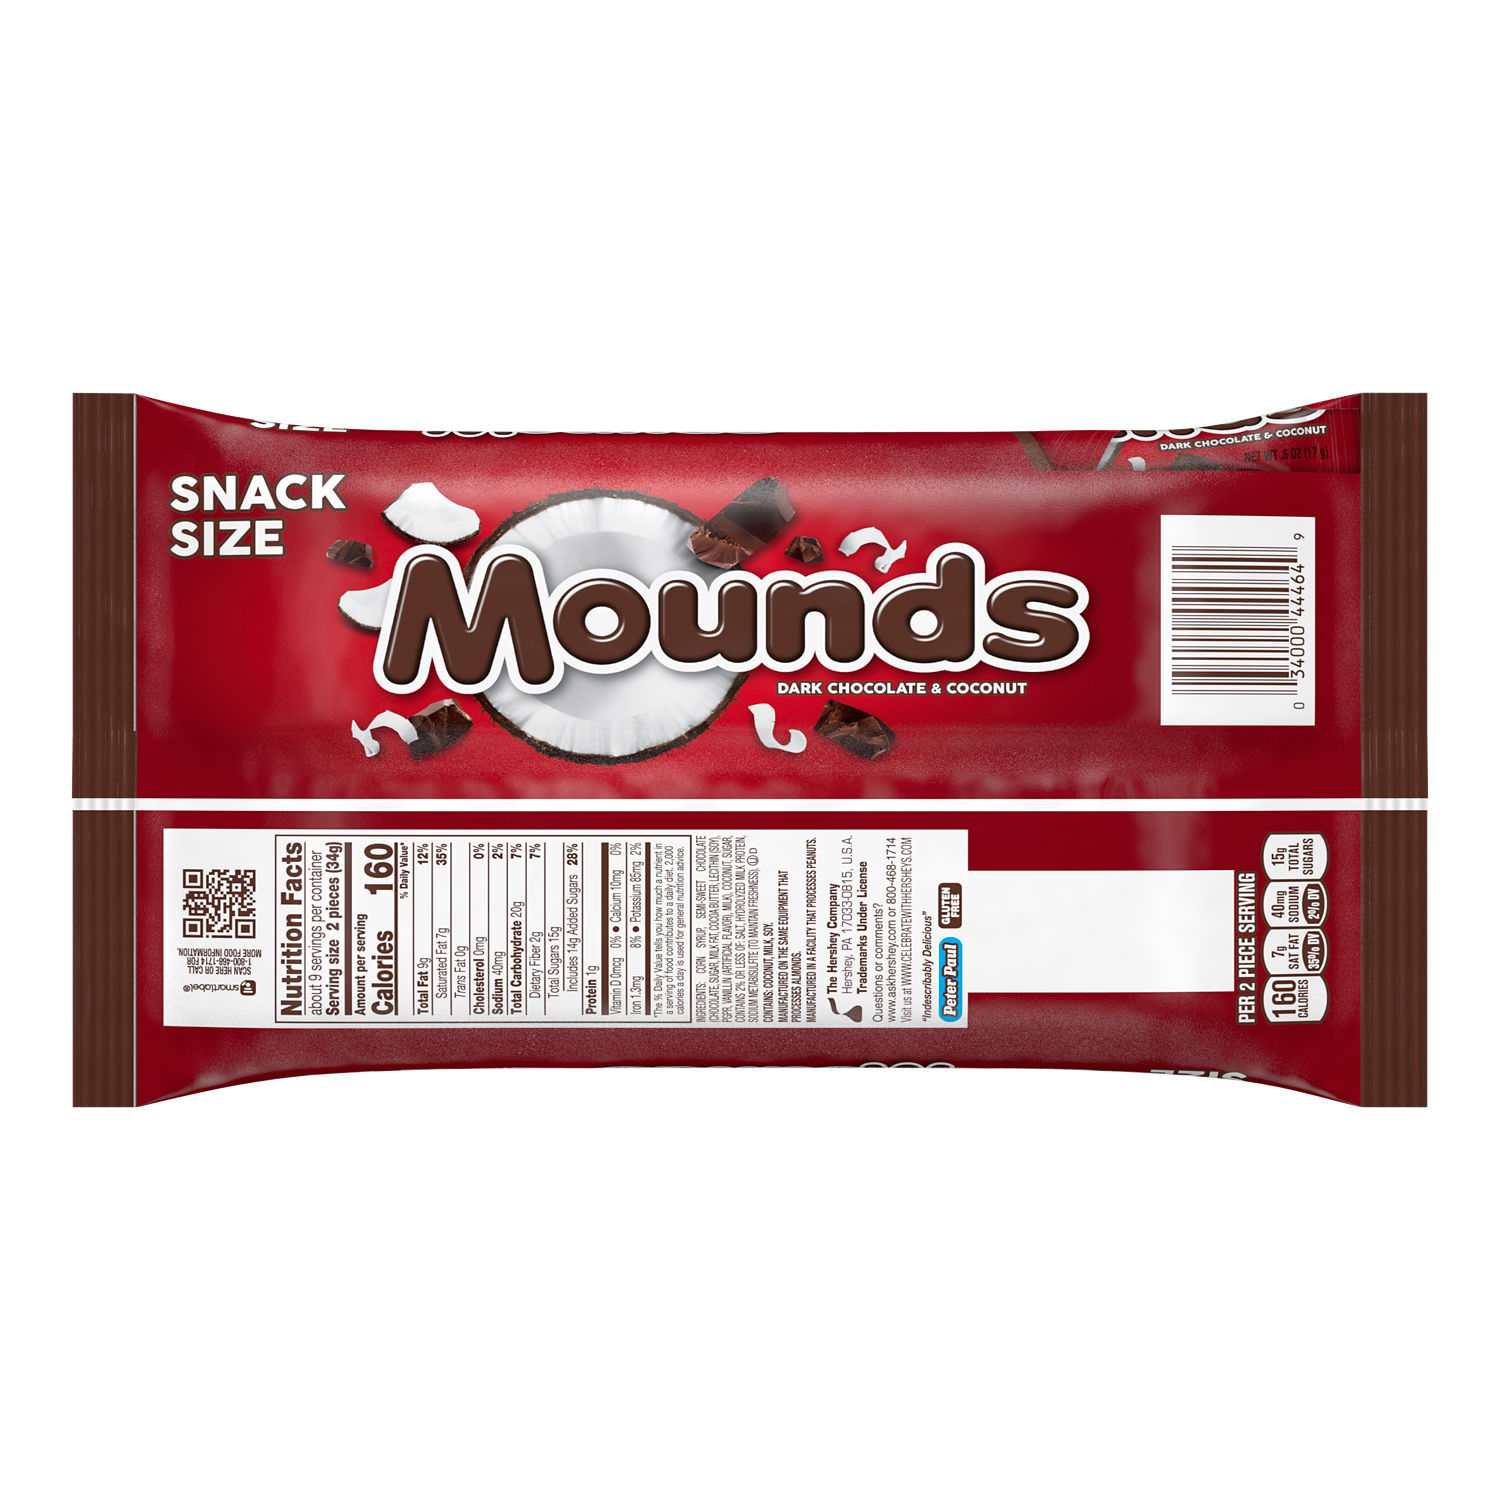 Mounds Dark Chocolate and Coconut Snack Size, Halloween Candy Bars Bag, 11.3 oz - image 2 of 7